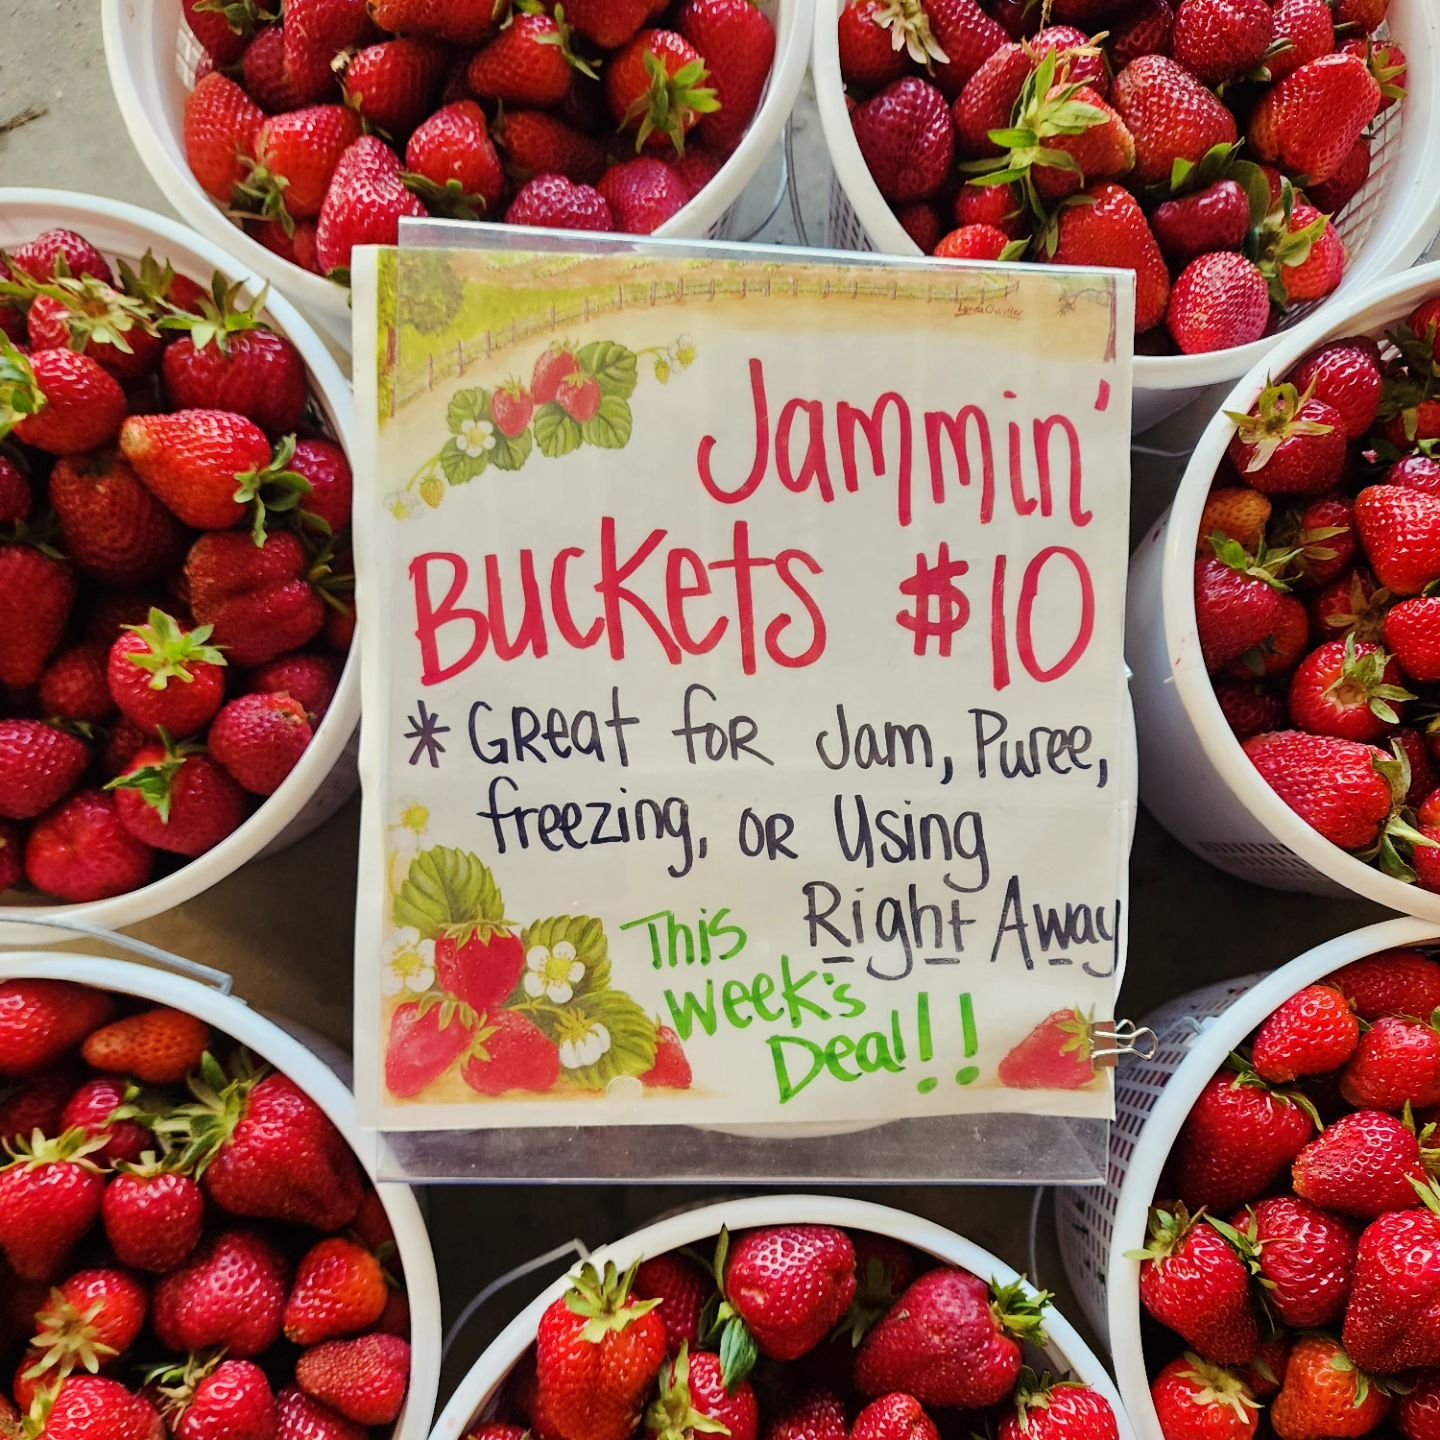 🍓🪣🍓🪣 This Week's Roadside Market Strawberry Deal! Get your Jam on while supplies last! 🍓🪣🍓🪣

⚠️Also, we appreciate everyone's patience as the road crews continue to work on Route 3. ⚠️ We are open and hope to see you! Strawberry patches are c